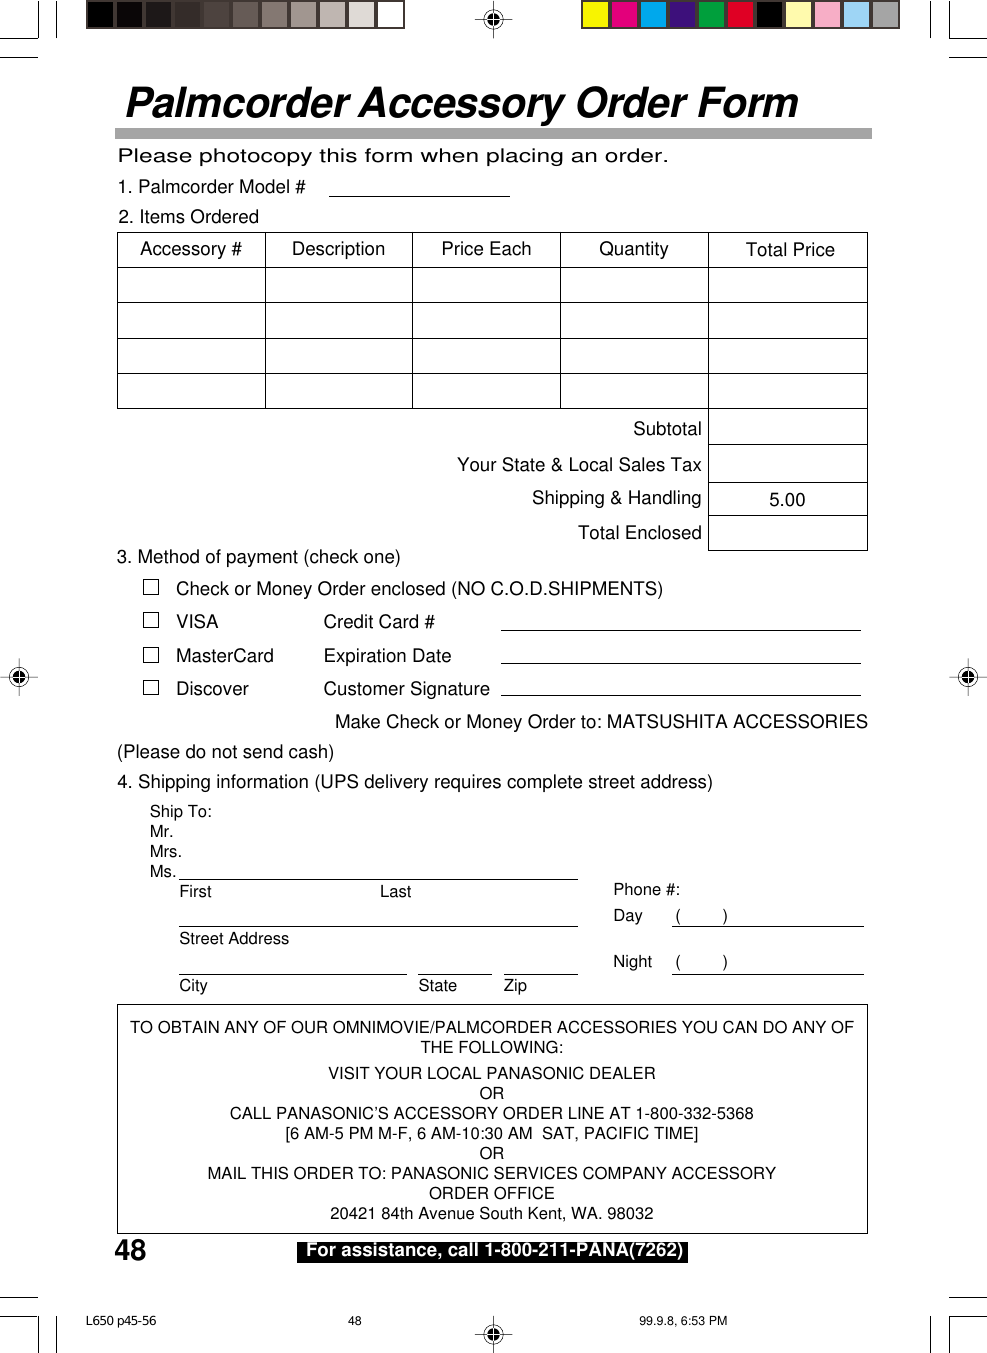 48 For assistance, call 1-800-211-PANA(7262)Palmcorder Accessory Order FormShip To:Mr.Mrs.Ms. First LastStreet AddressCity State ZipPhone #:Day       (         )Night     (         )4. Shipping information (UPS delivery requires complete street address)Please photocopy this form when placing an order.3. Method of payment (check one)Check or Money Order enclosed (NO C.O.D.SHIPMENTS)VISA Credit Card #MasterCard Expiration DateDiscover Customer SignatureMake Check or Money Order to: MATSUSHITA ACCESSORIES(Please do not send cash)2. Items OrderedQuantityAccessory # Price EachDescription Total Price5.00SubtotalYour State &amp; Local Sales TaxShipping &amp; HandlingTotal Enclosed1. Palmcorder Model #TO OBTAIN ANY OF OUR OMNIMOVIE/PALMCORDER ACCESSORIES YOU CAN DO ANY OFTHE FOLLOWING:VISIT YOUR LOCAL PANASONIC DEALERORCALL PANASONIC’S ACCESSORY ORDER LINE AT 1-800-332-5368[6 AM-5 PM M-F, 6 AM-10:30 AM  SAT, PACIFIC TIME]ORMAIL THIS ORDER TO: PANASONIC SERVICES COMPANY ACCESSORYORDER OFFICE20421 84th Avenue South Kent, WA. 98032L650 p45-56 99.9.8, 6:53 PM48